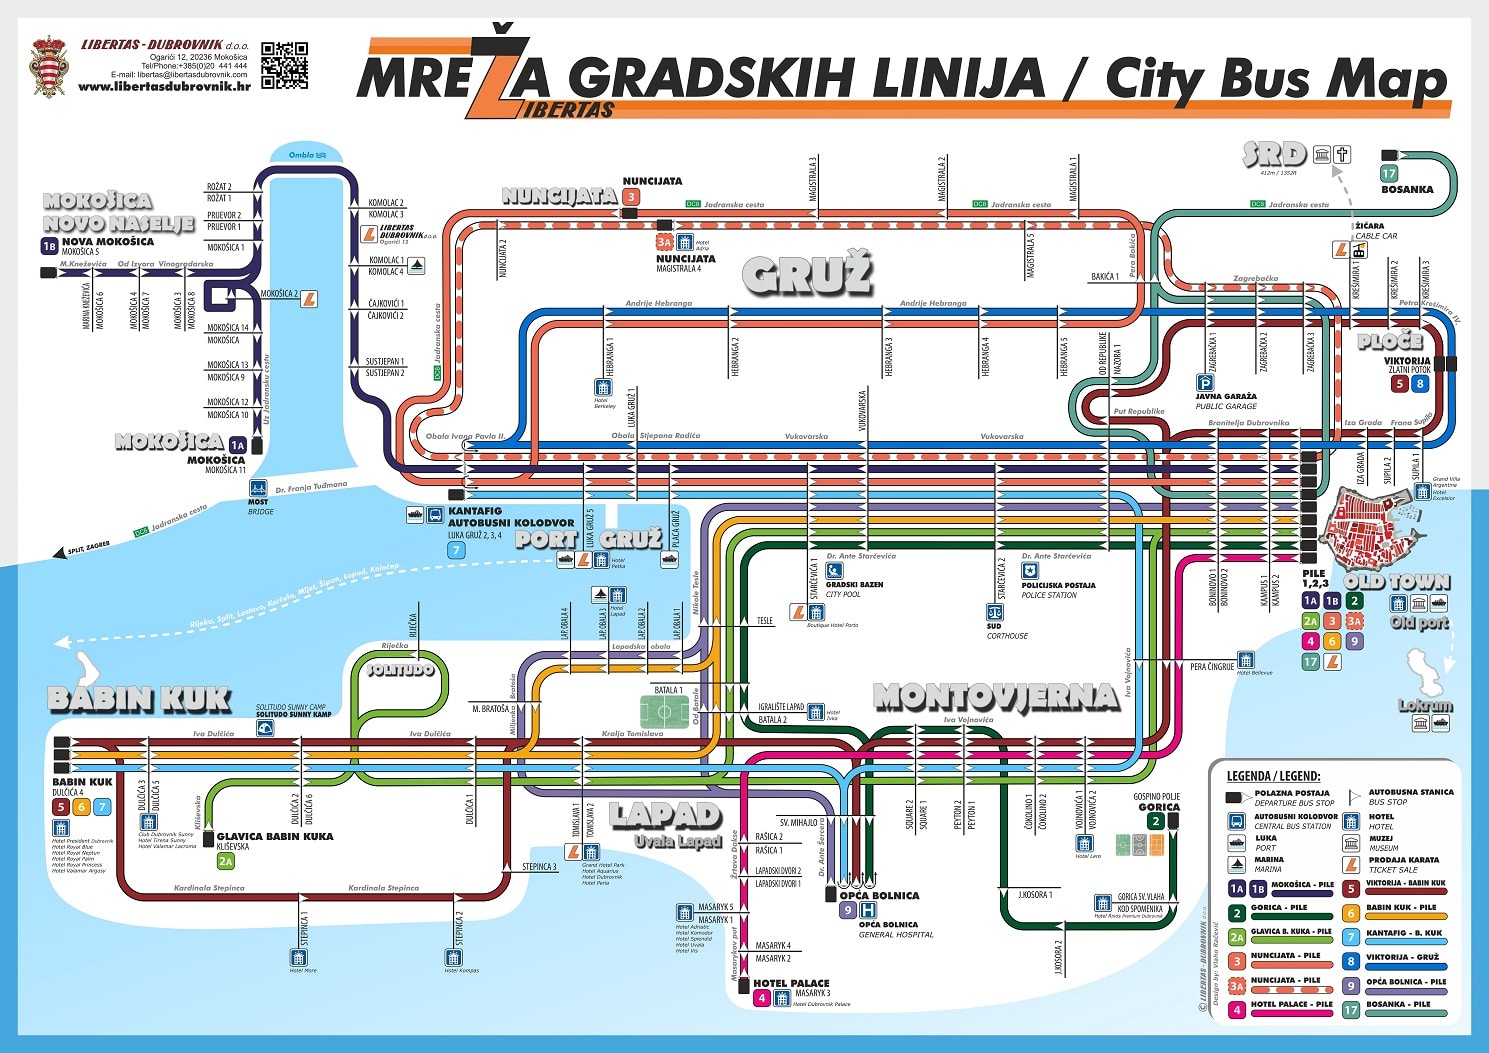 Dubrovnik Bus Map, a graphic representing the city and all its public bus lines and bus stops